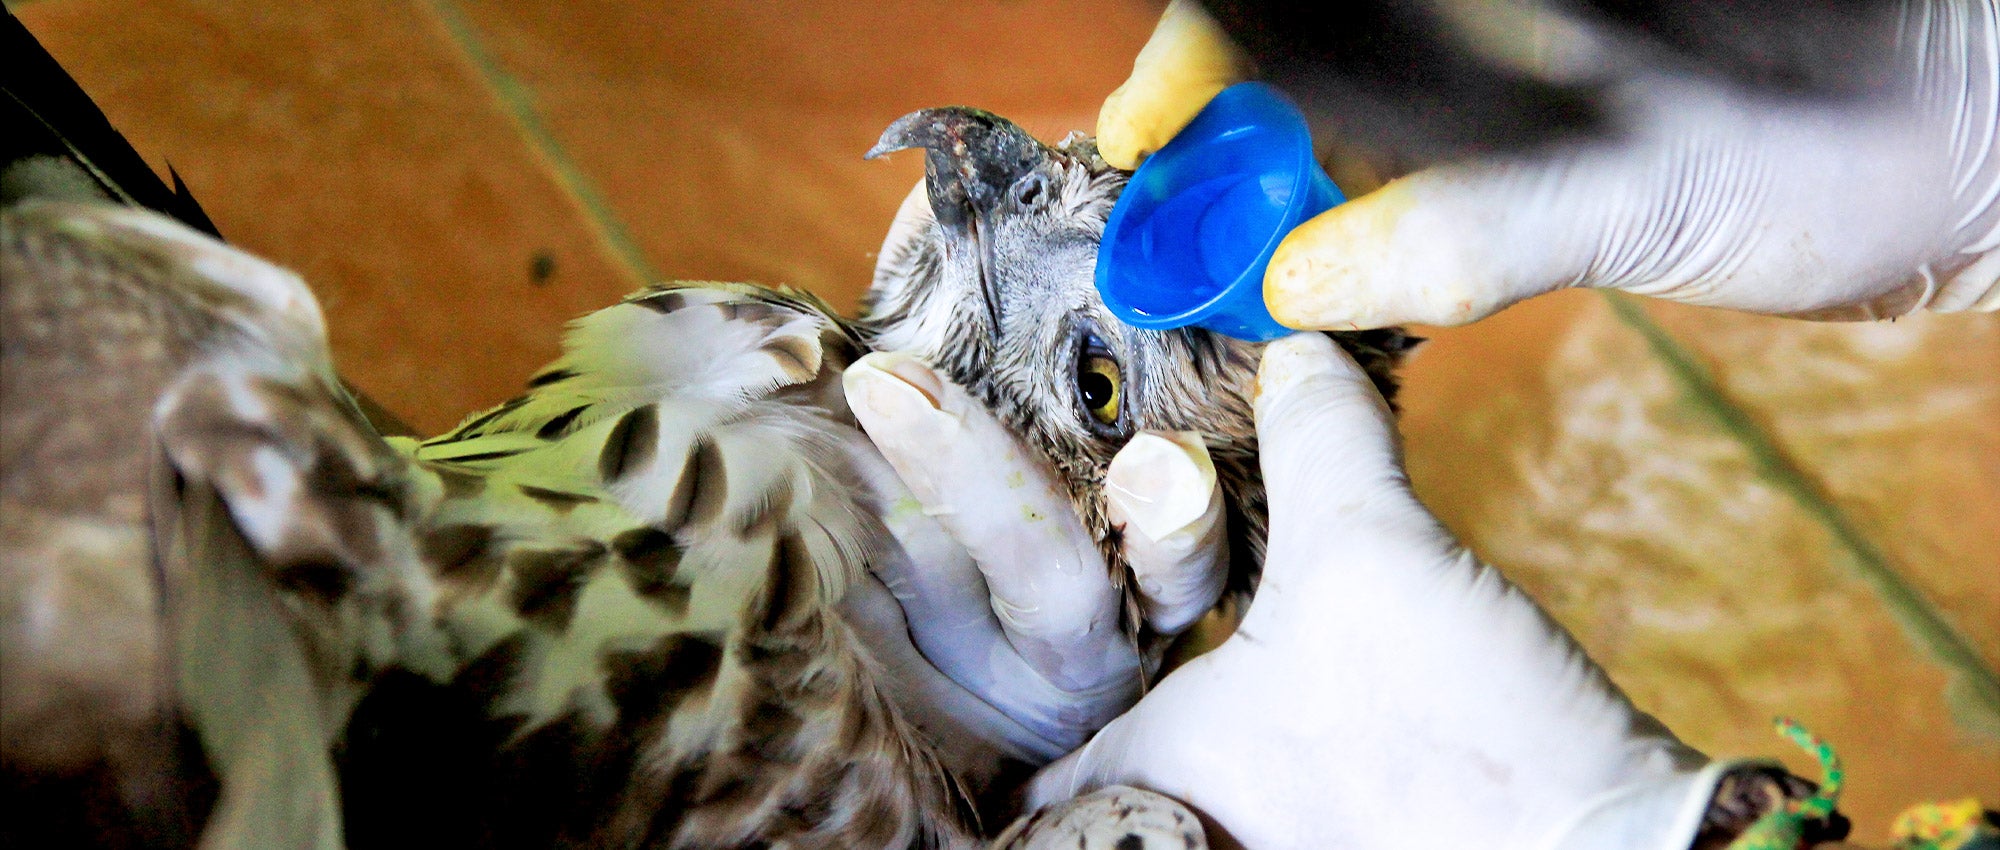 How to find a wildlife rehabilitator | The Humane Society of the United  States